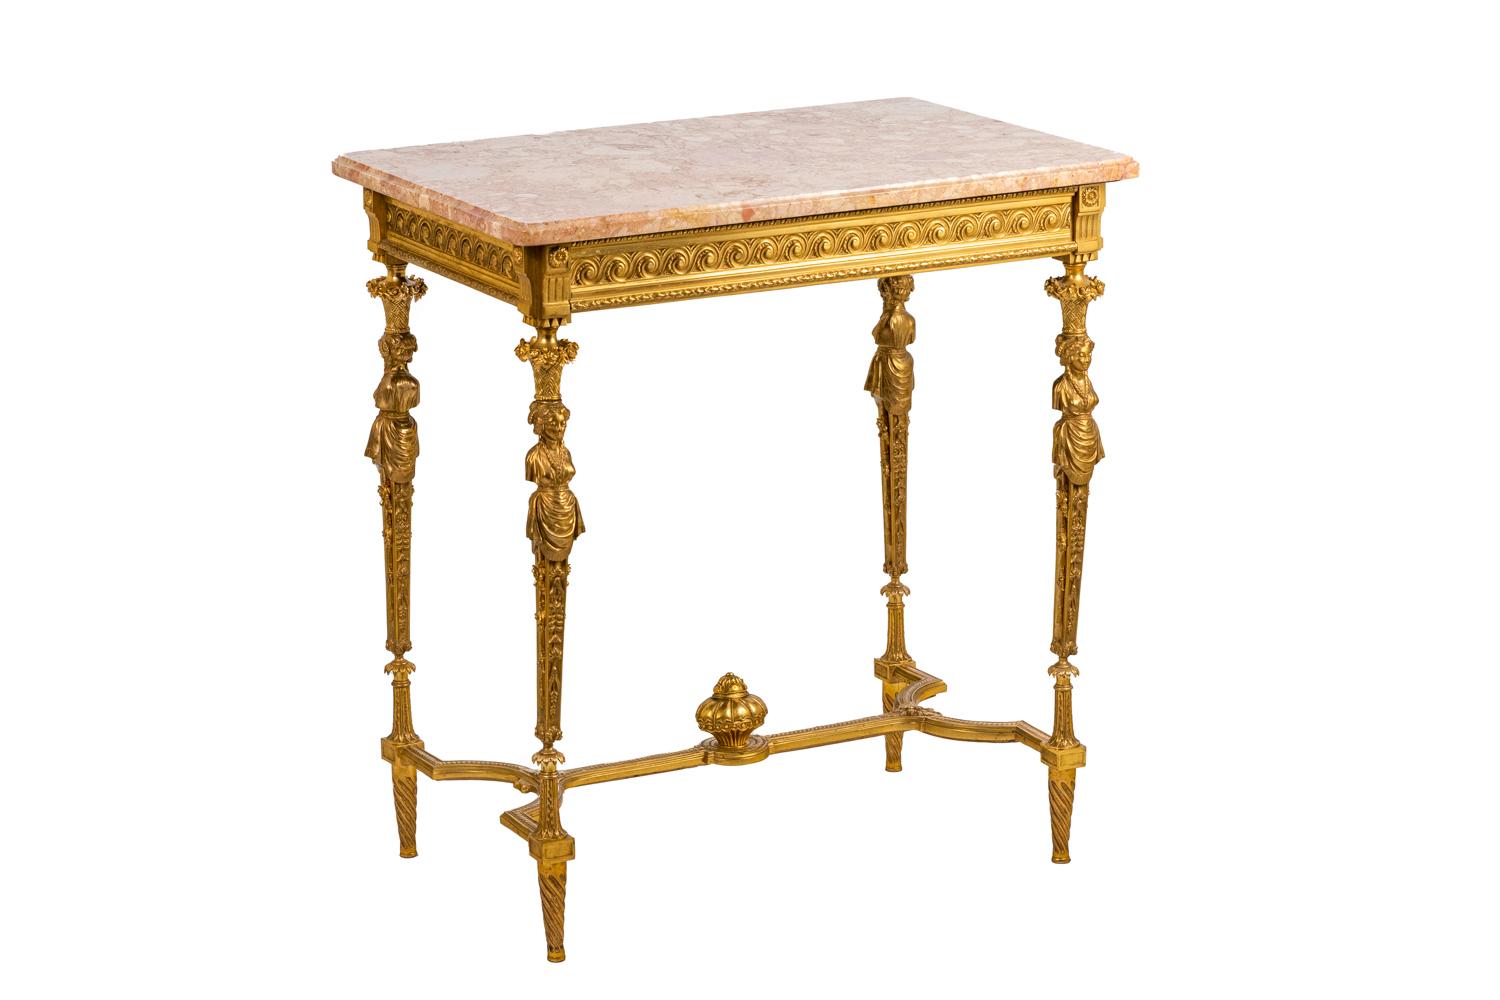 Adam Weisweiler, in the style of. 

Table in chiseled and gilt bronze.Tray in rose marble. Legs adorned with caryatids topped by a vase of flowers, below them fall garlands of flowers, all united by a spacer adorned by a chambord vase in its